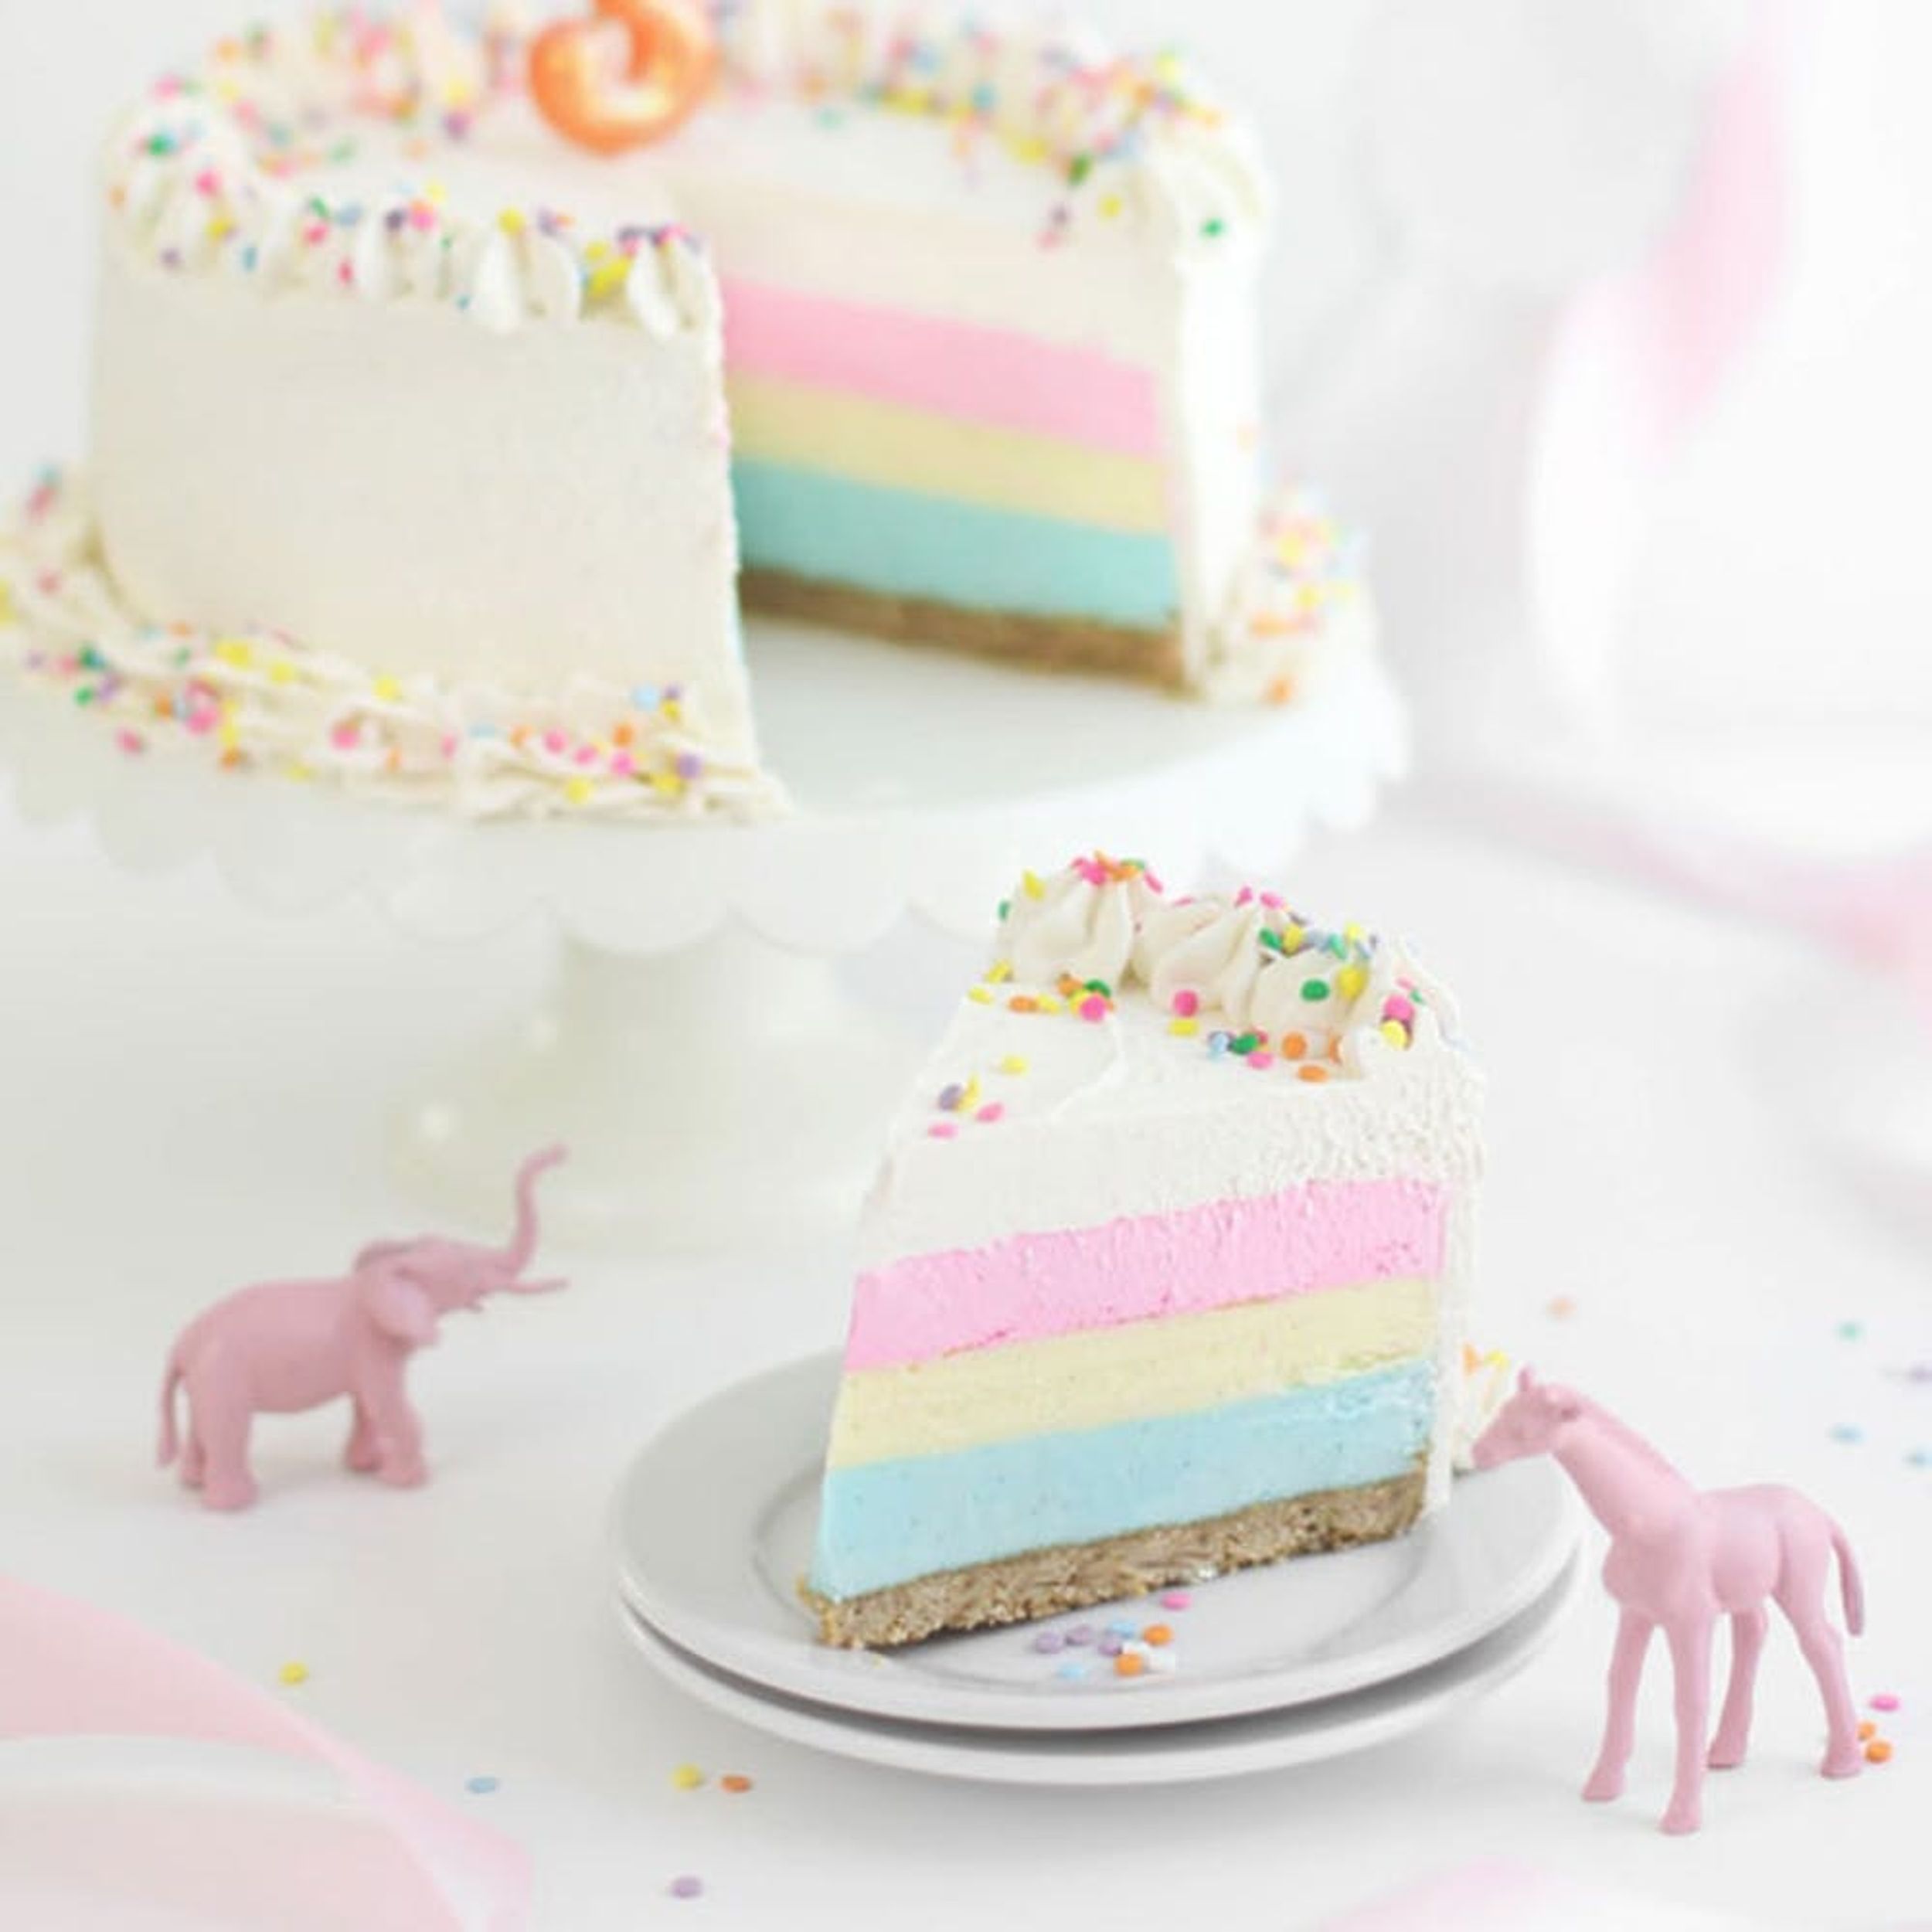 14 Pastel Cakes for Early Spring Soirées